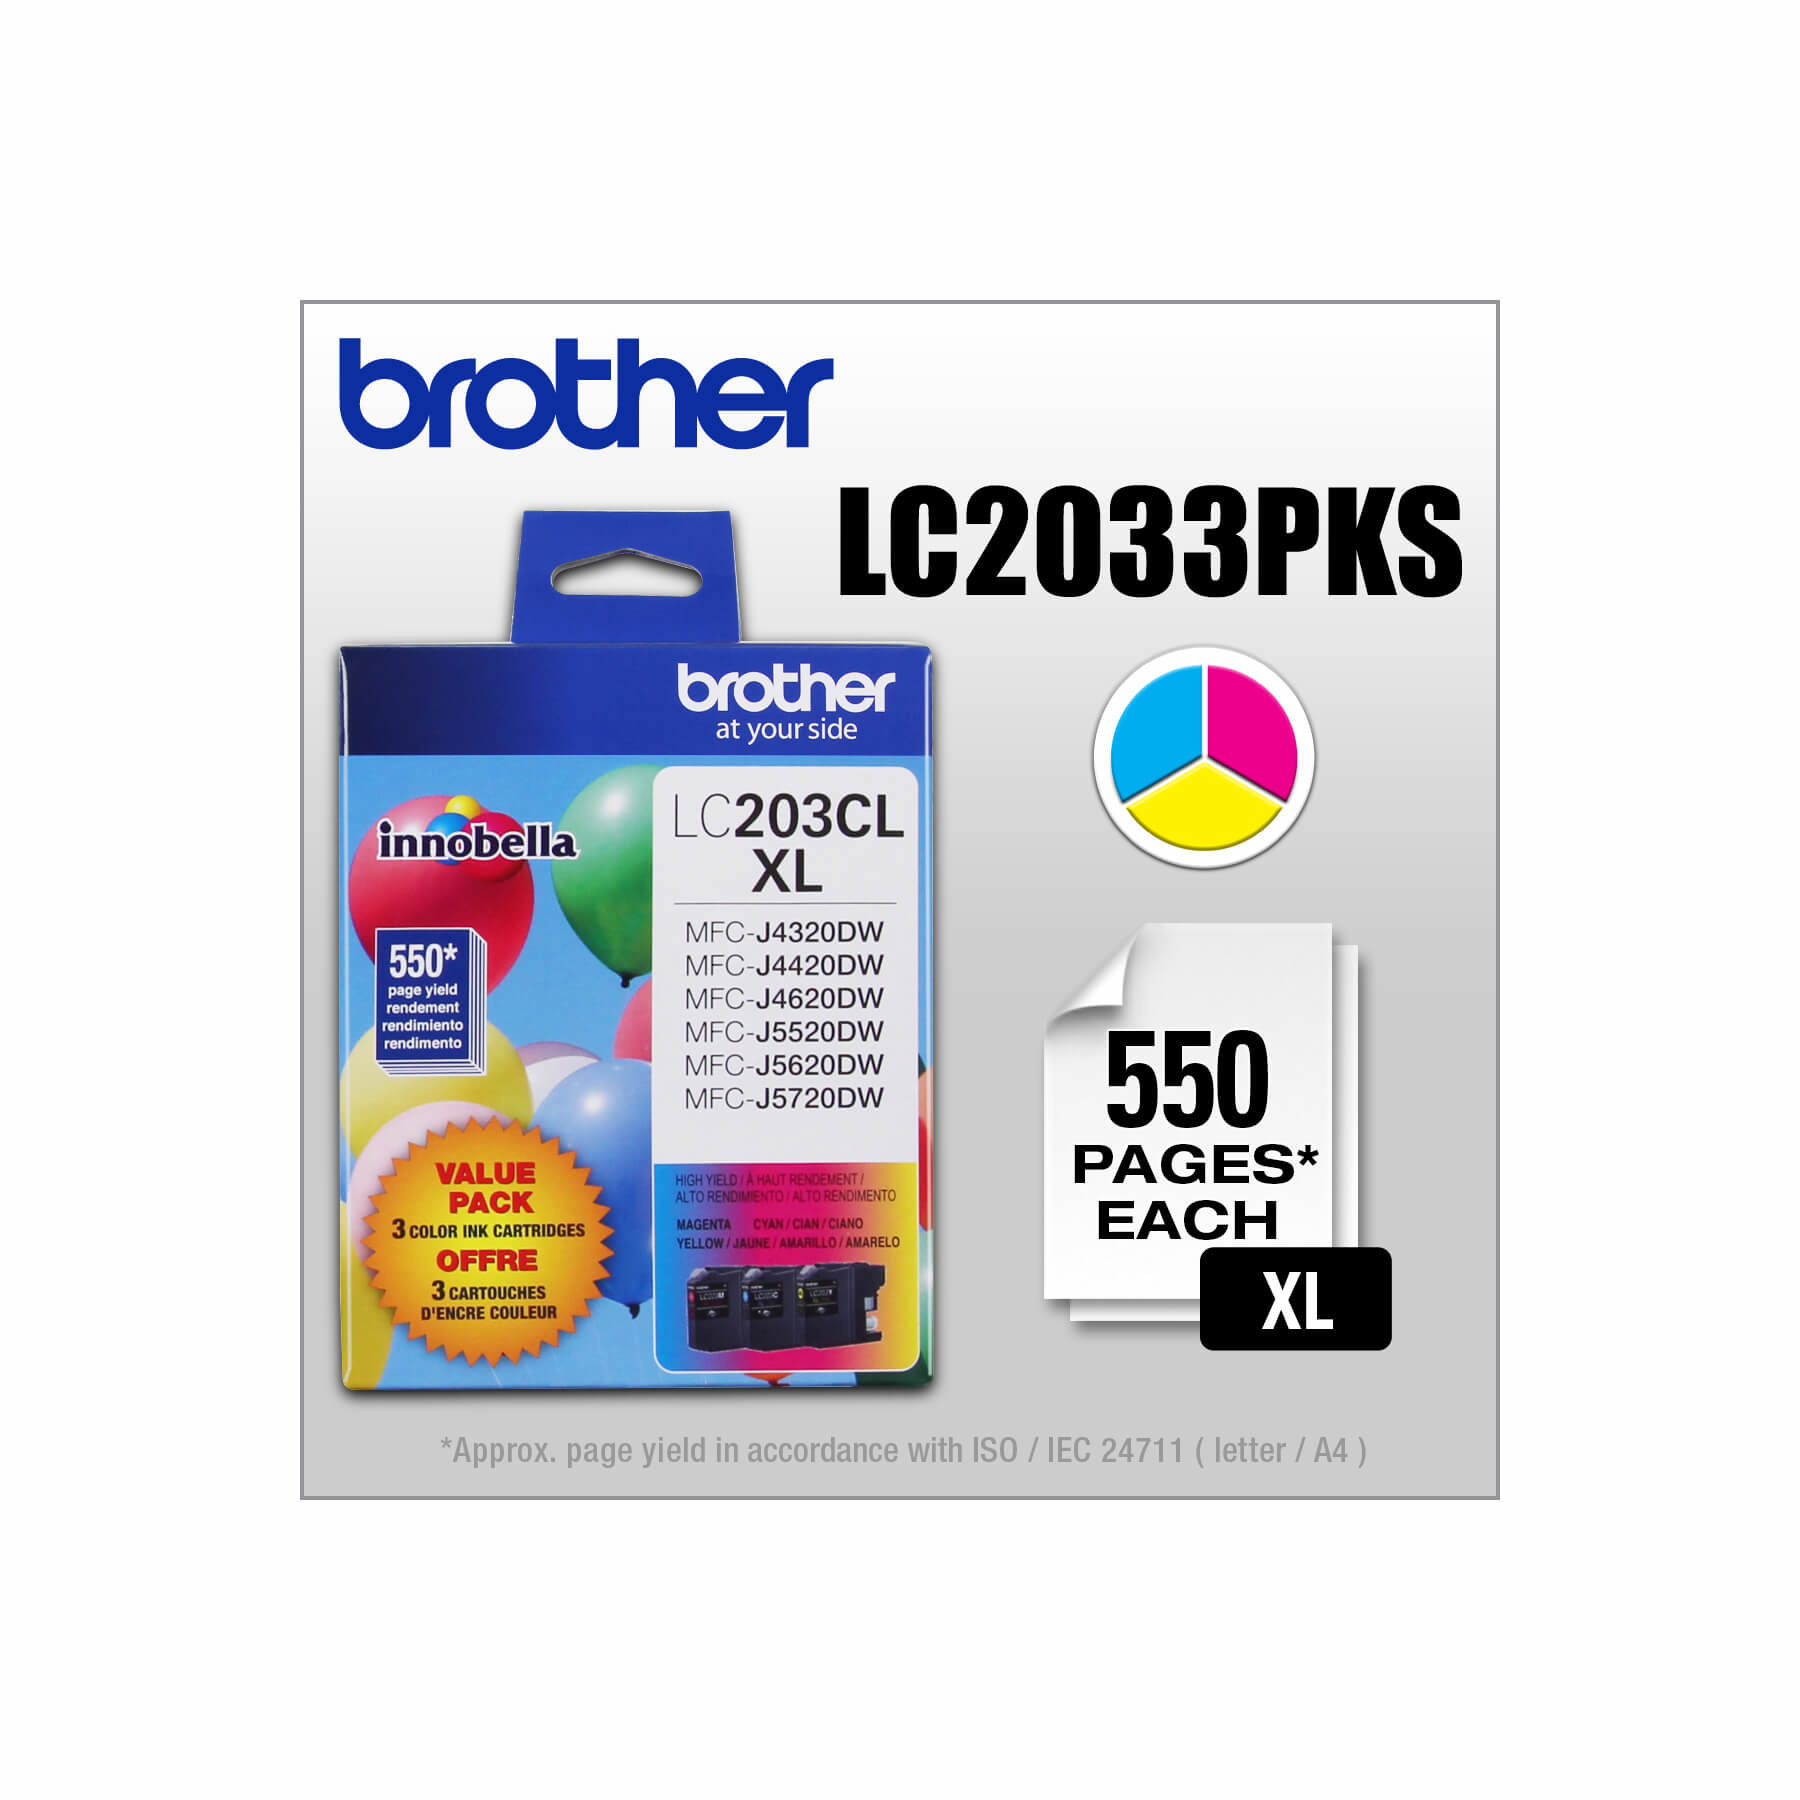 Brother LC-2033PKS 550pages Cyan Magenta Yellow ink cartridge